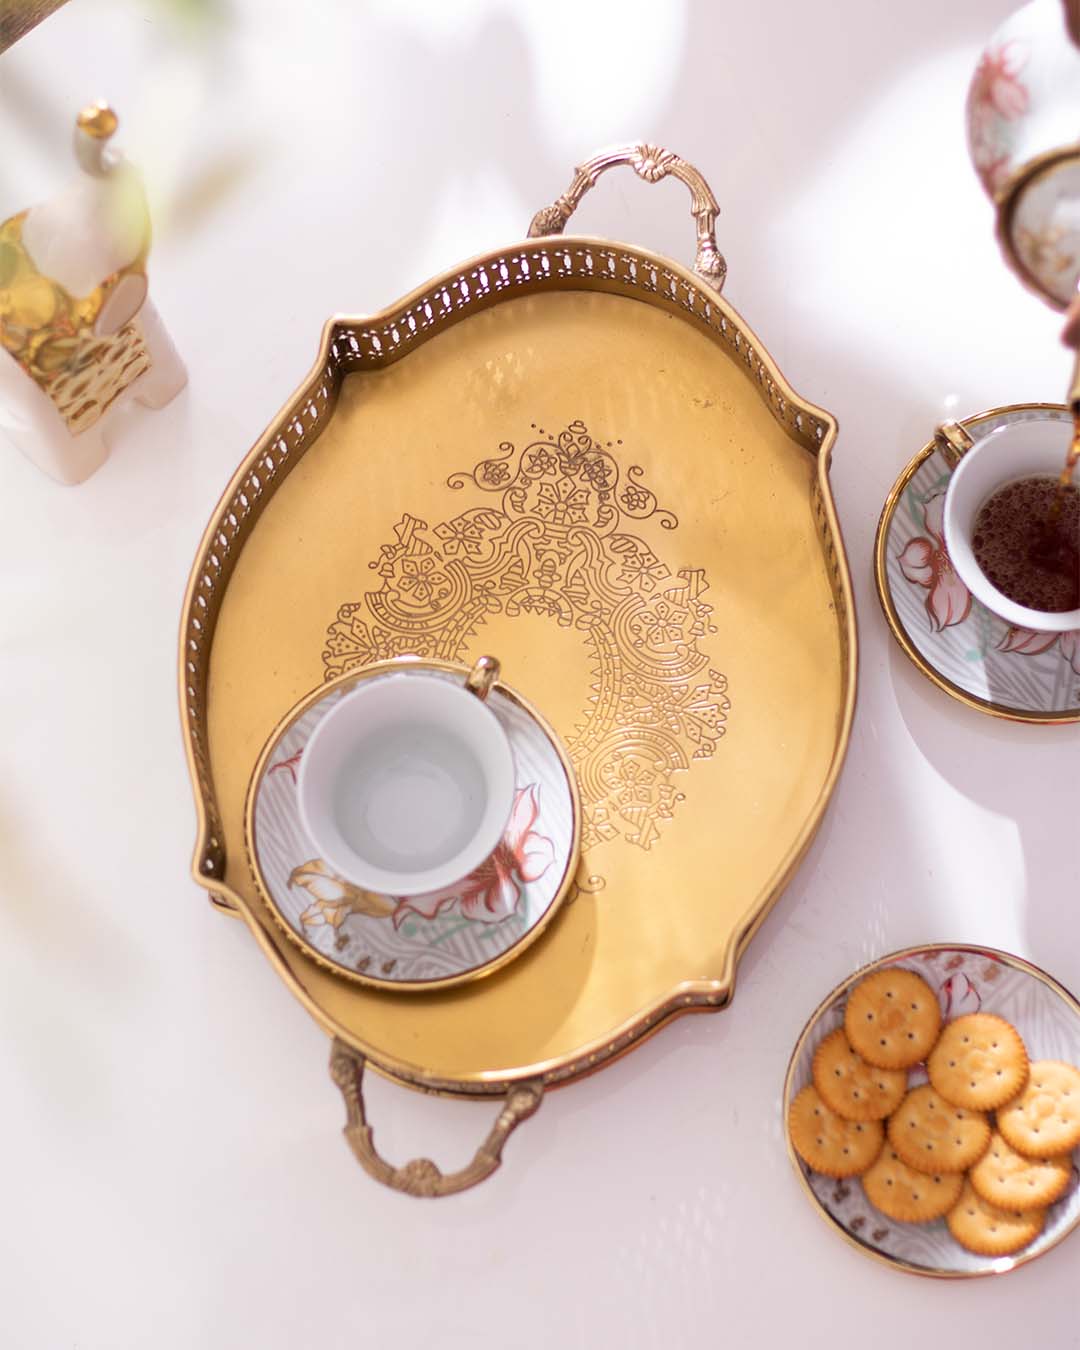 Elegant gold decorative tray with intricate lace cut-out design and handle, perfect for sophisticated table settings.